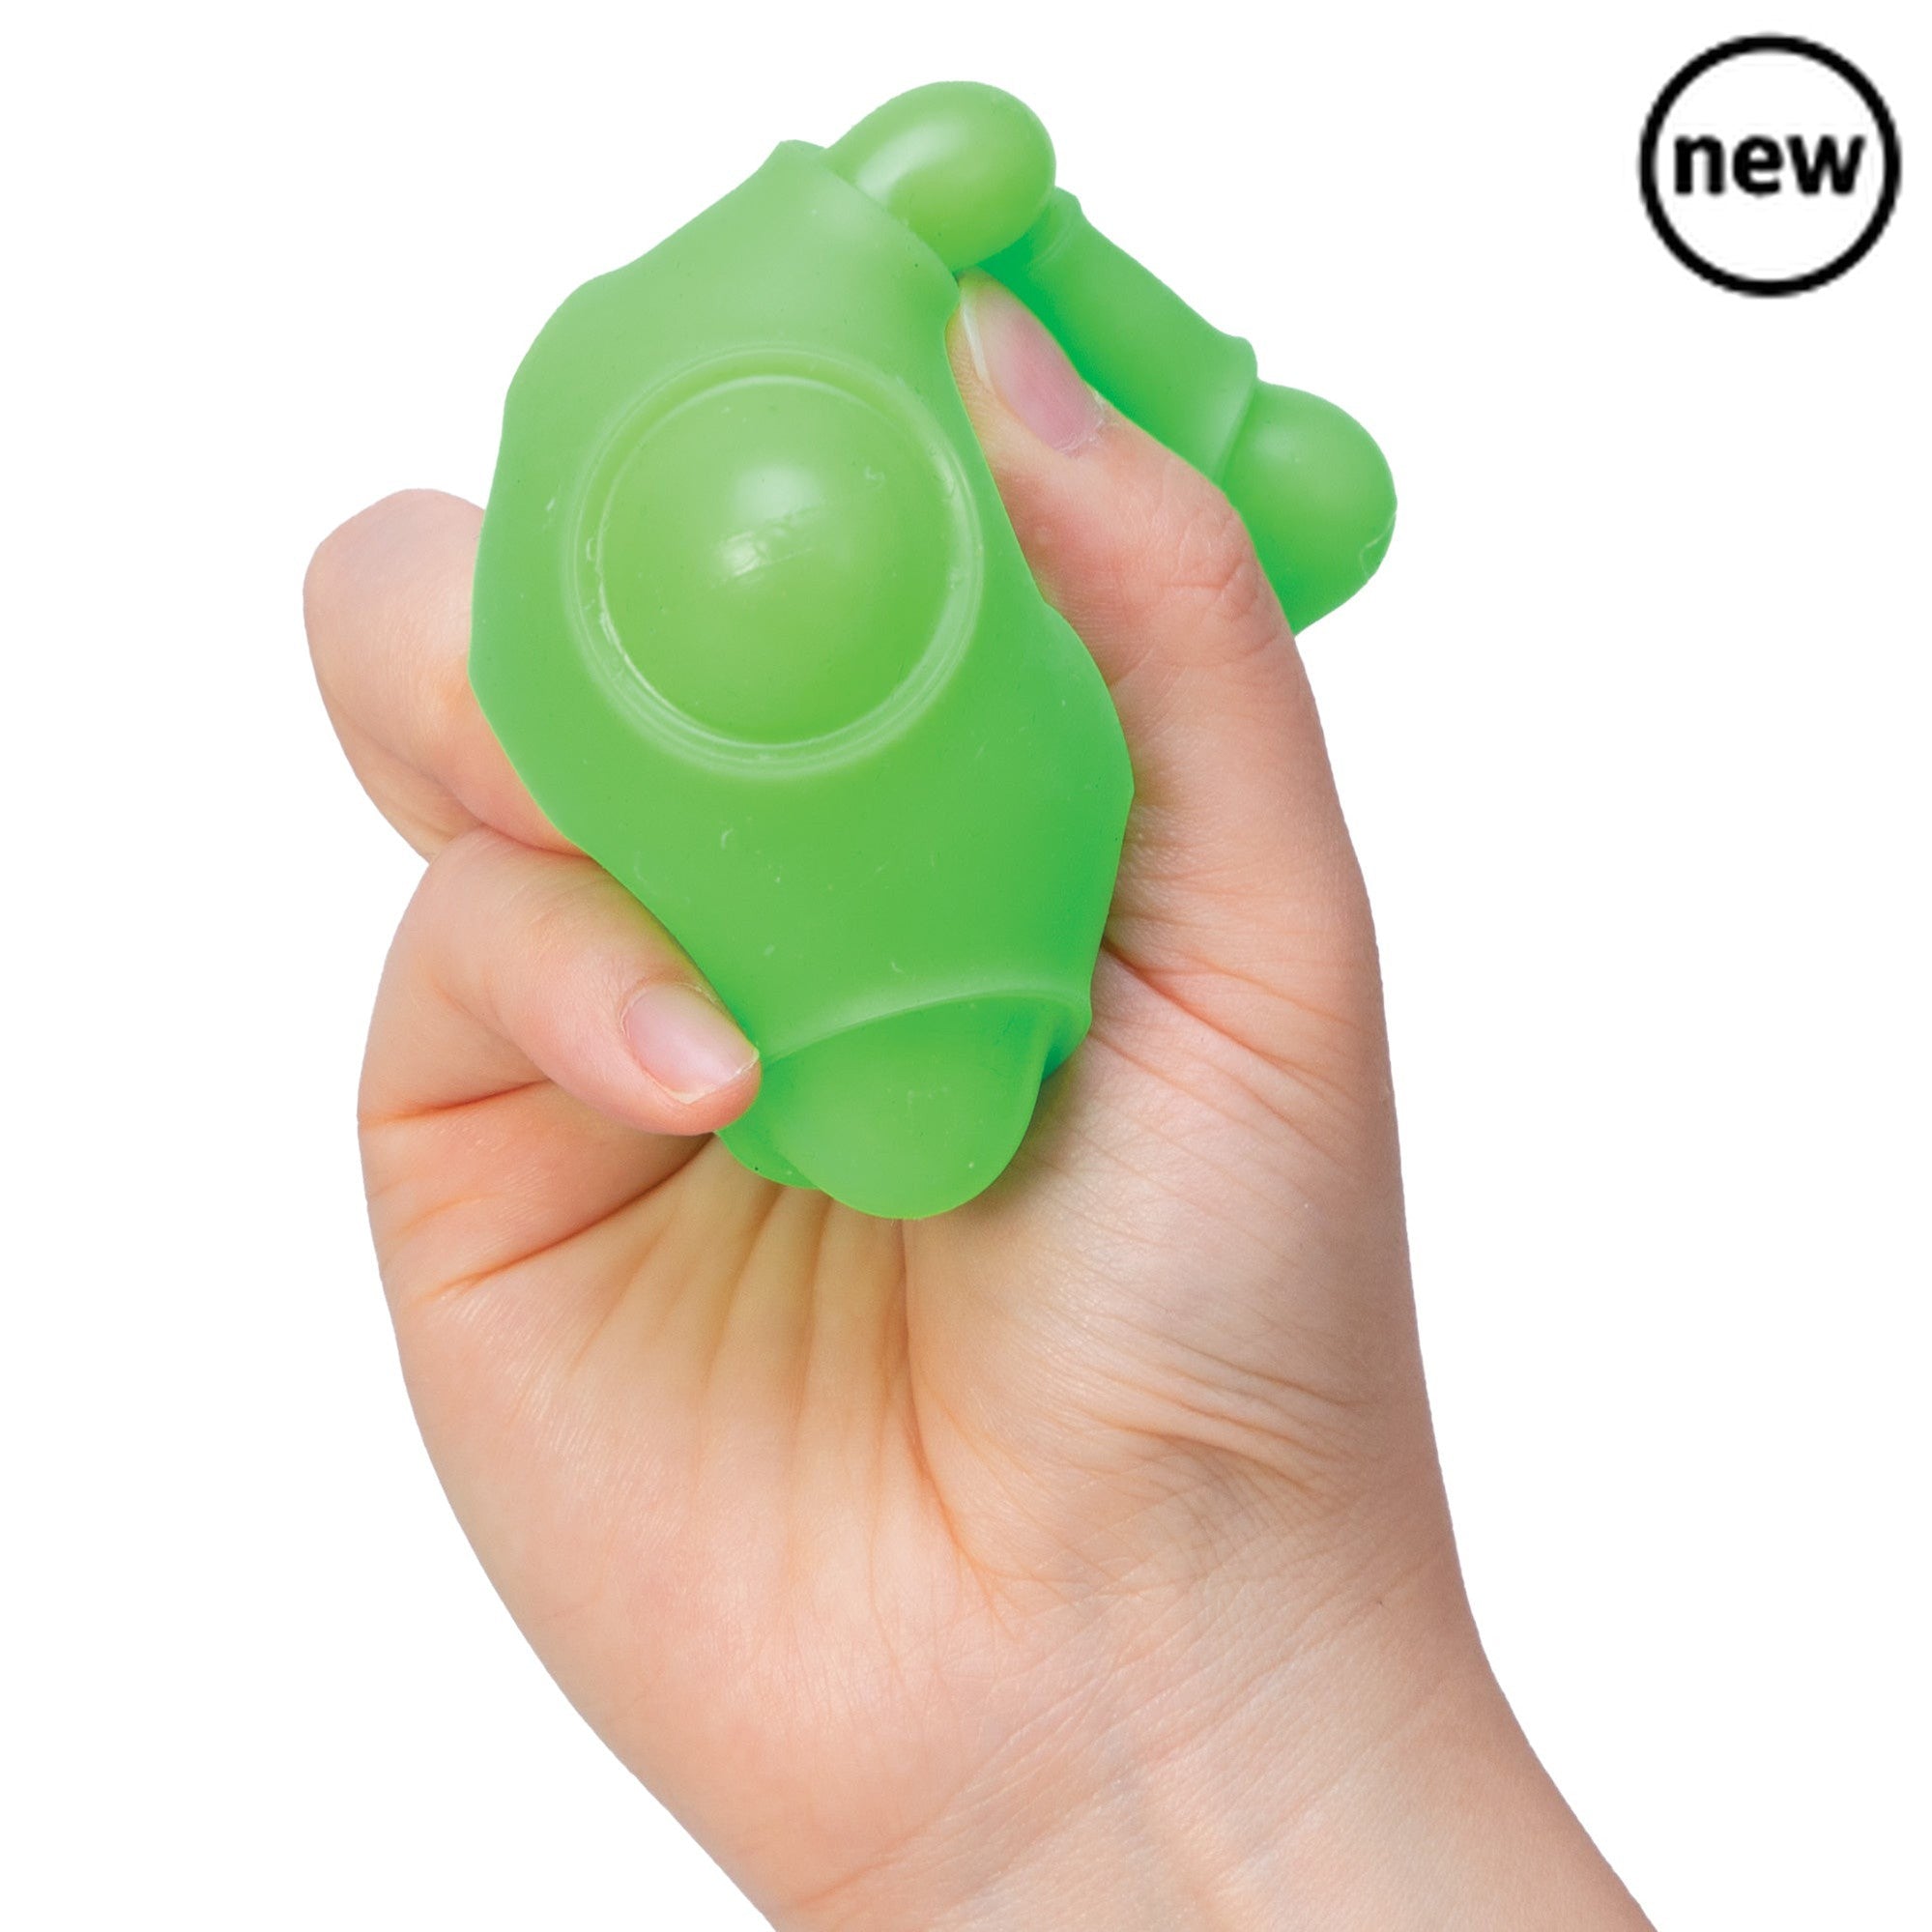 NeeDoh Happy Snappy, NeeDoh’s answer to a pop it fidget toy, Happy Snappy is the ultimate fidget toy stress ball. Instead of being filled with dough like regular NeeDoh balls, it’s filled with air. Gently squeeze the air-filled ball to watch the concave holes pop out, which make an addictive bubble ‘pop’ sound. Available in four bright colours chosen at random. Happy Snap NeeDoh is a great fidget toy, particularly appropriate for those with ADD, ADHD, OCD, Autism, and anxiety. Gentle on little fingers and m